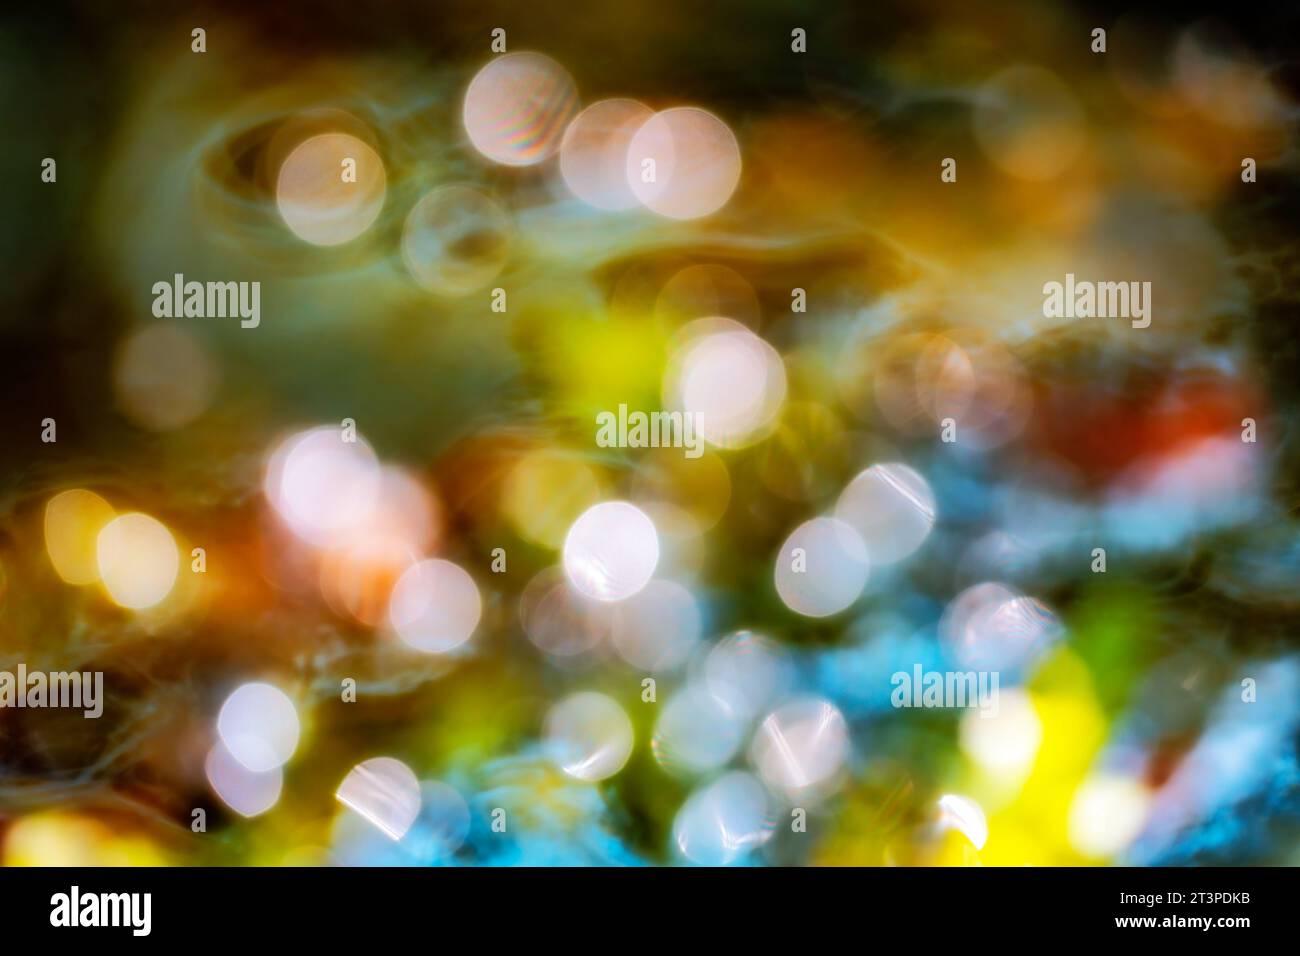 Abstract bokeh background with light reflections Stock Photo